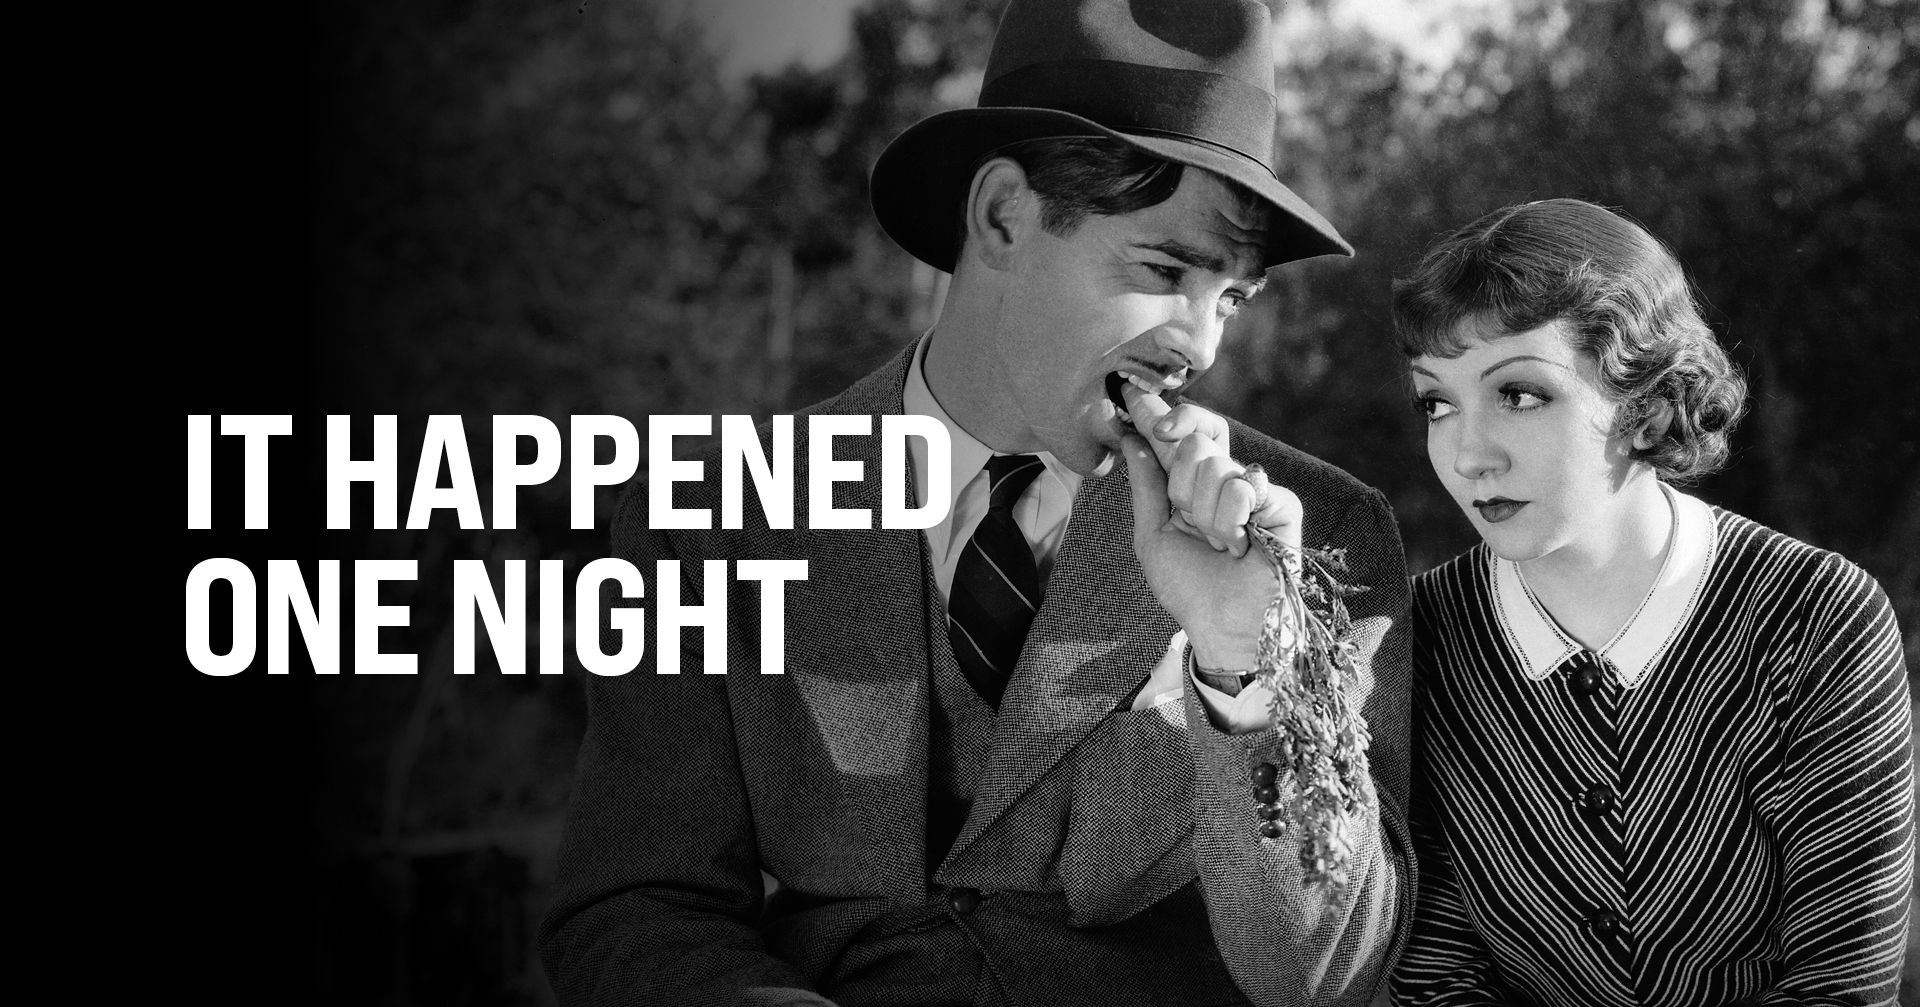 41-facts-about-the-movie-it-happened-one-night